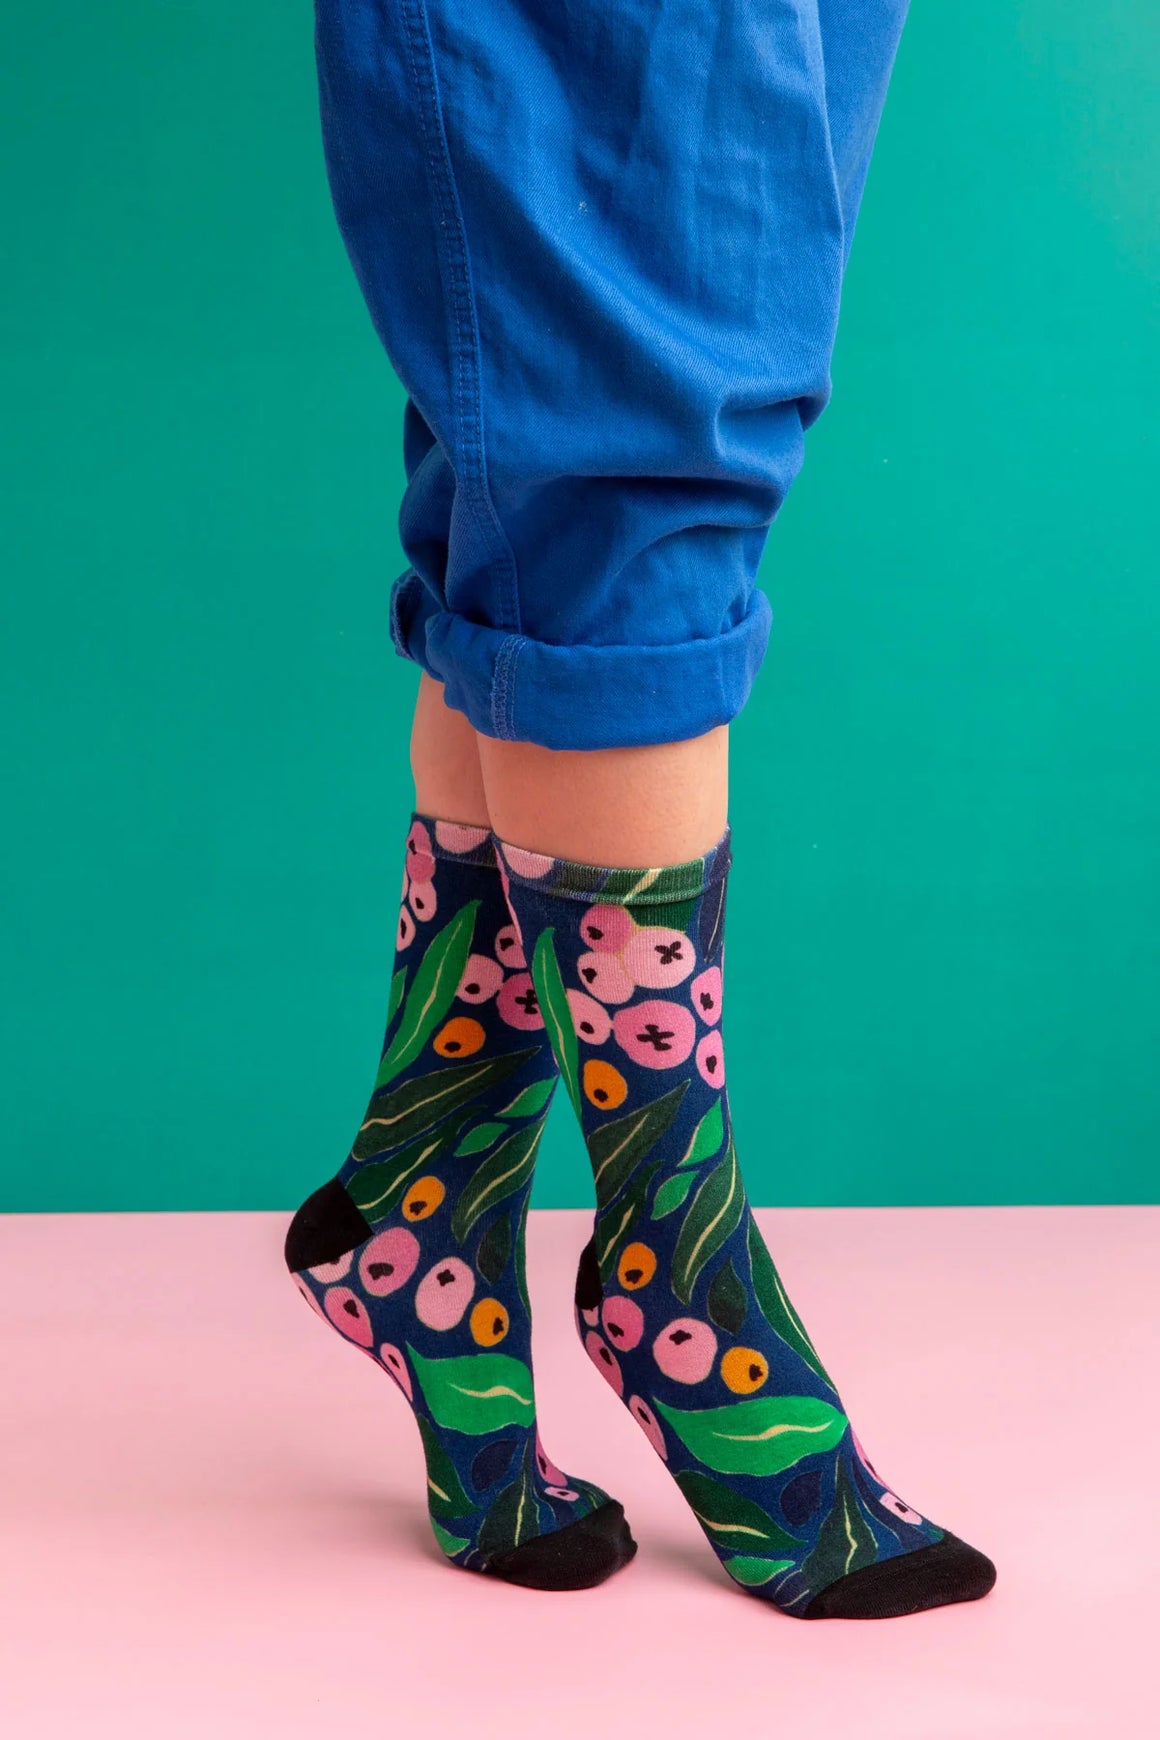 Liili Pilly socks by Julie White Featuring original hand drawn 'LILLY PILLY‘ print - This painterly, abstract print features rhythmic leaves and layered berries of the Lilly Pilly tree. Beaut!